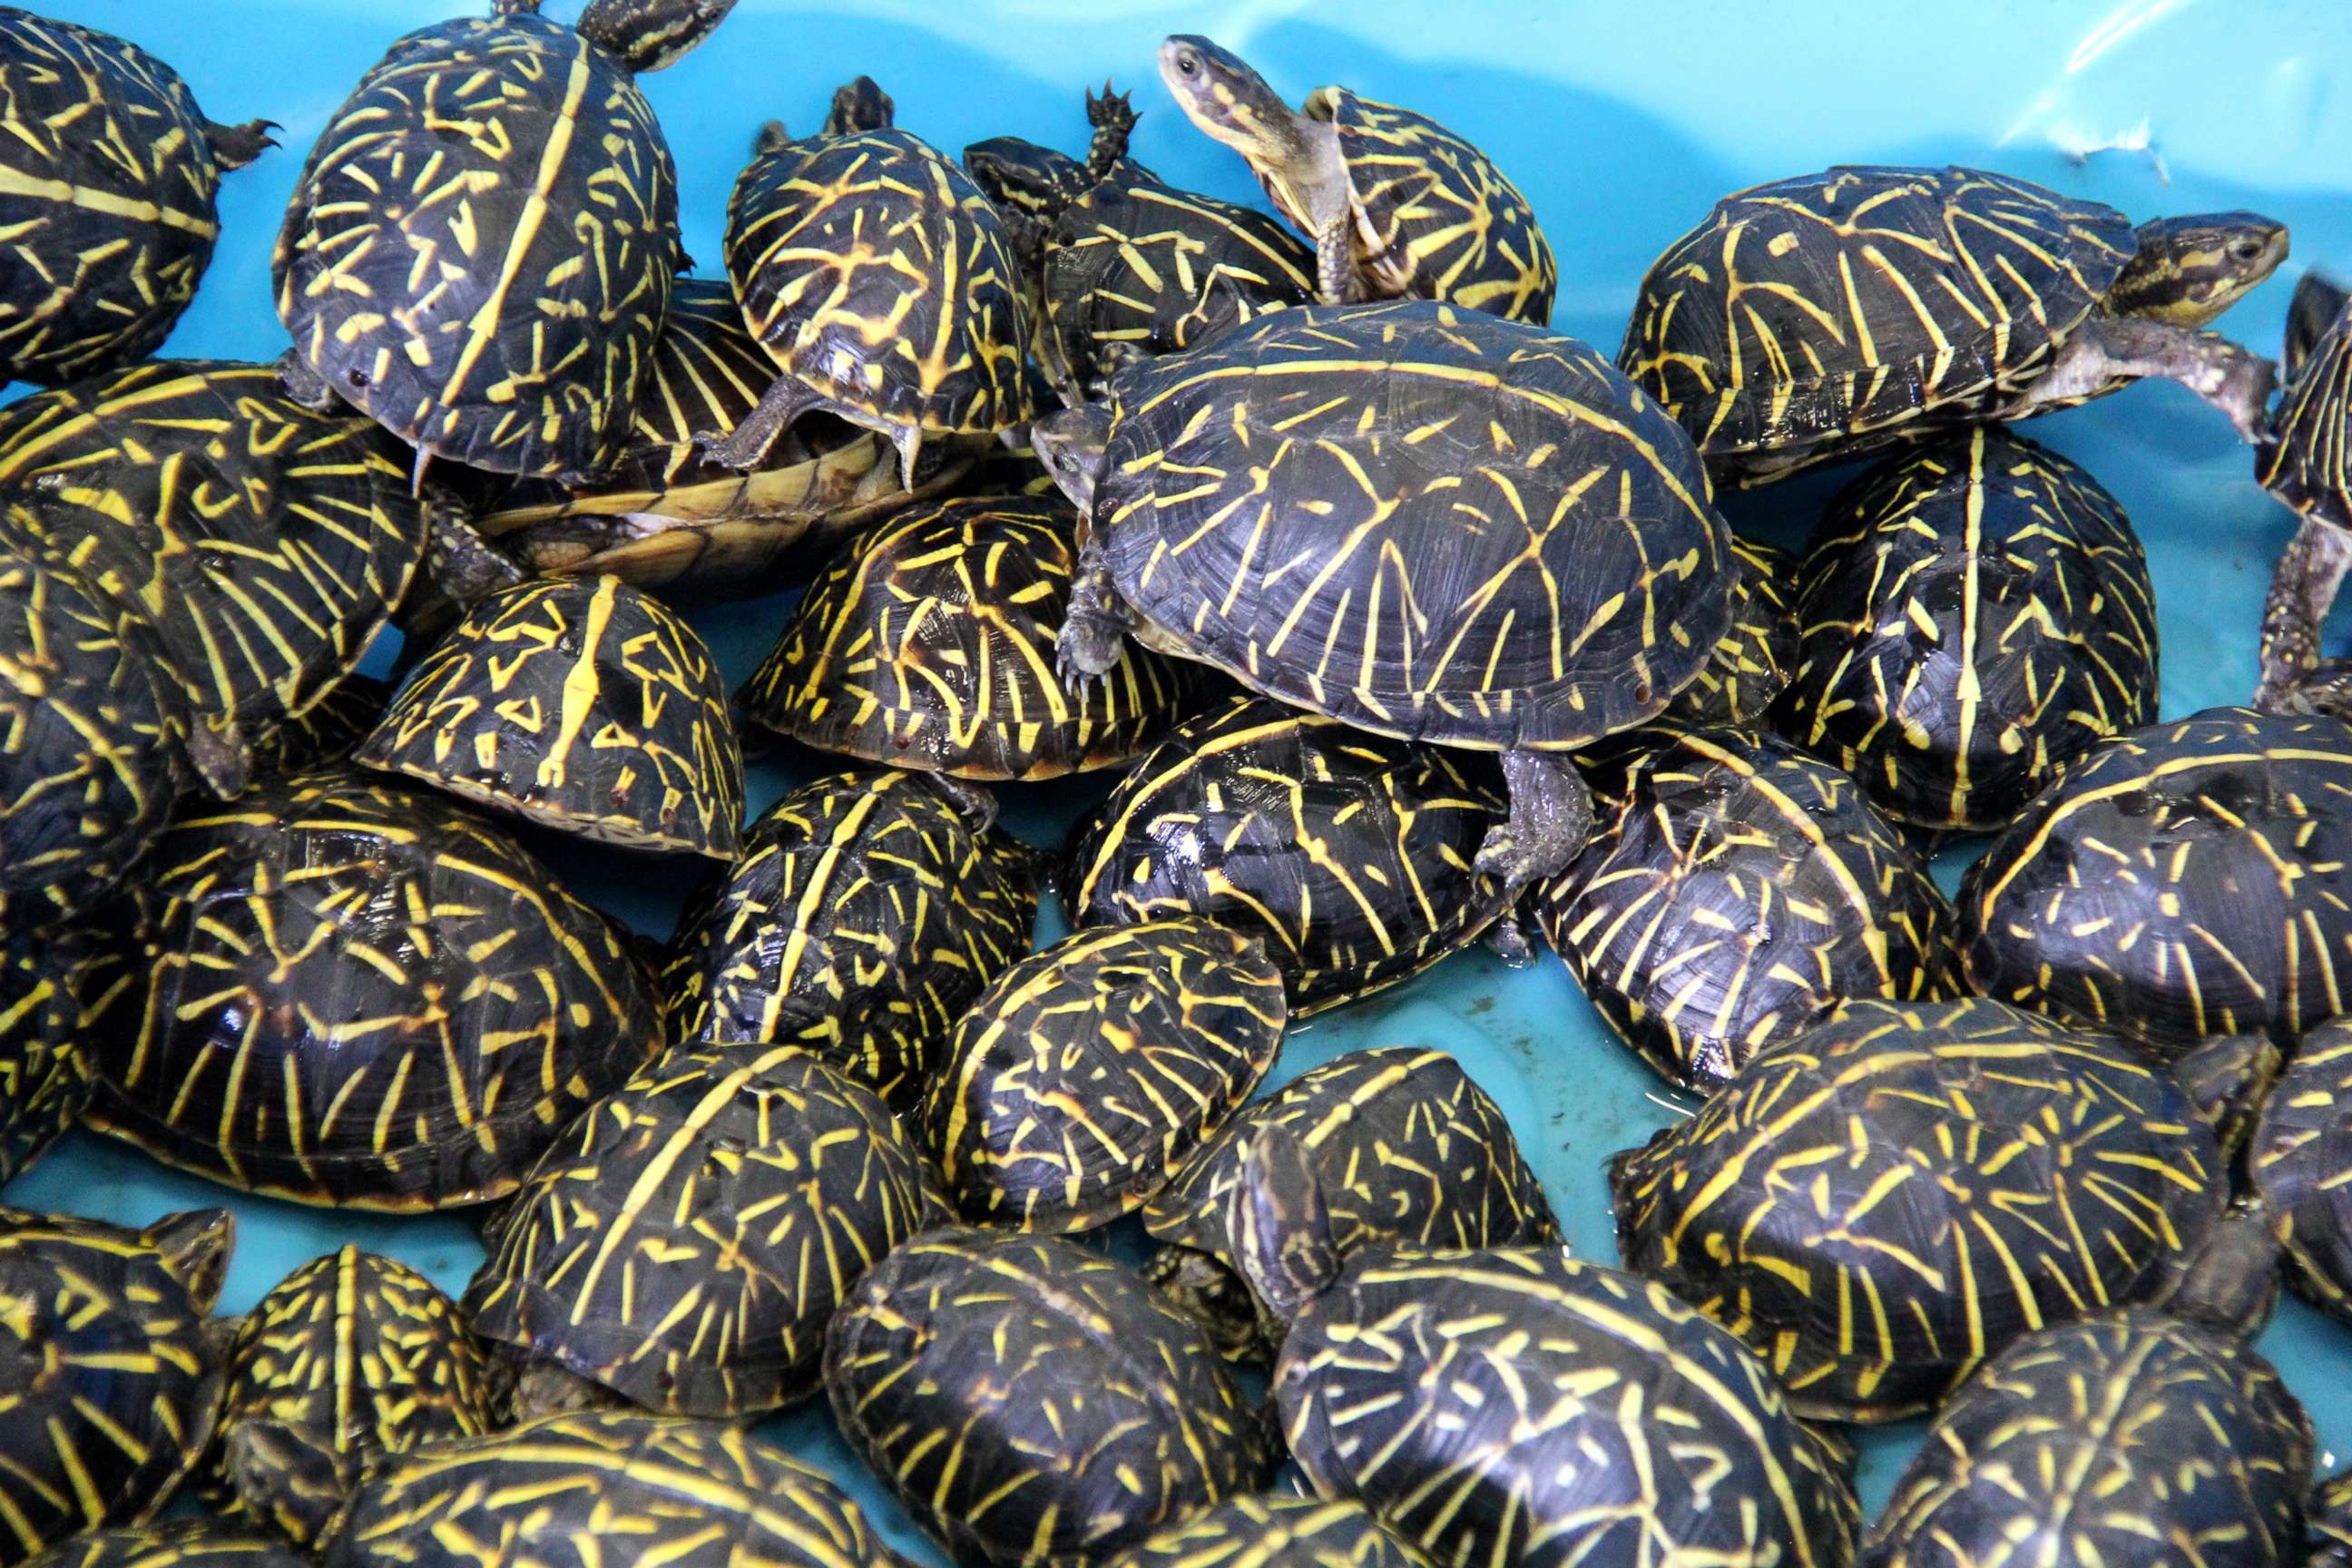 PHOTO: Wildlife officials in Florida returned turtles to the wild after busting a trafficking ring of thousands of the smuggled reptiles.